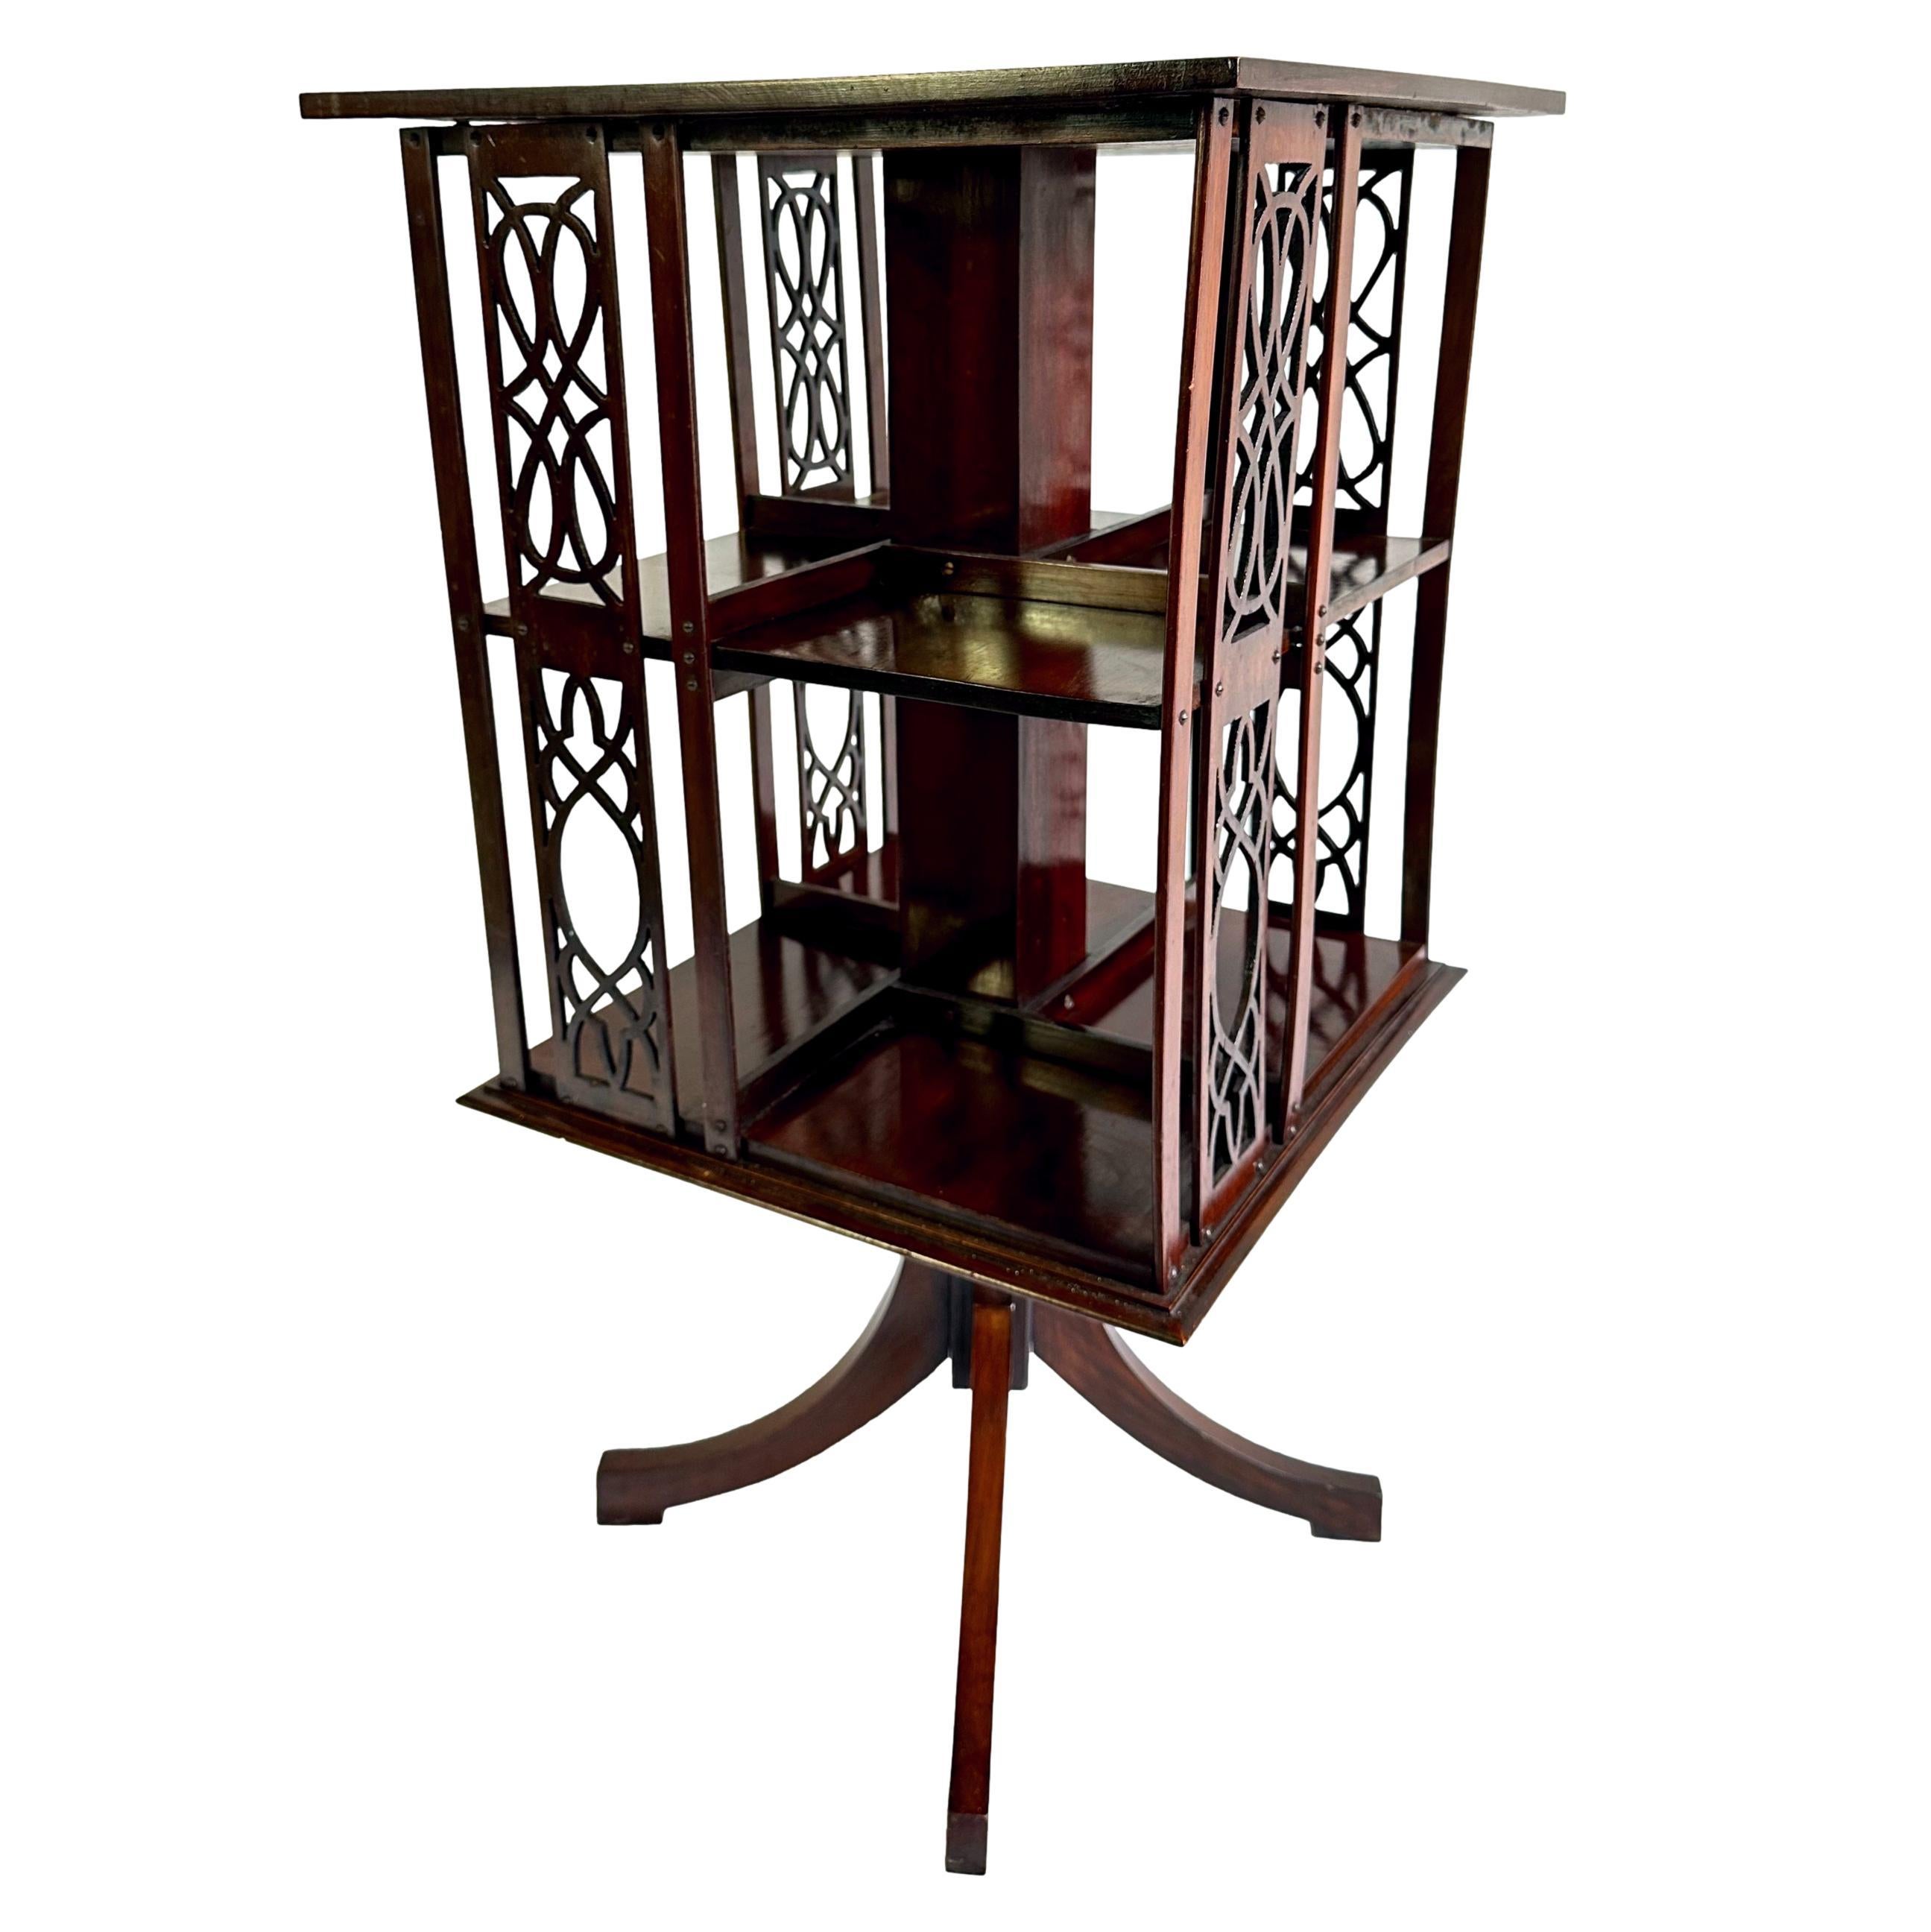 Edwardian A Mahogany Revolving Bookcase with Satinwood Inlay, English, ca. 1900 For Sale